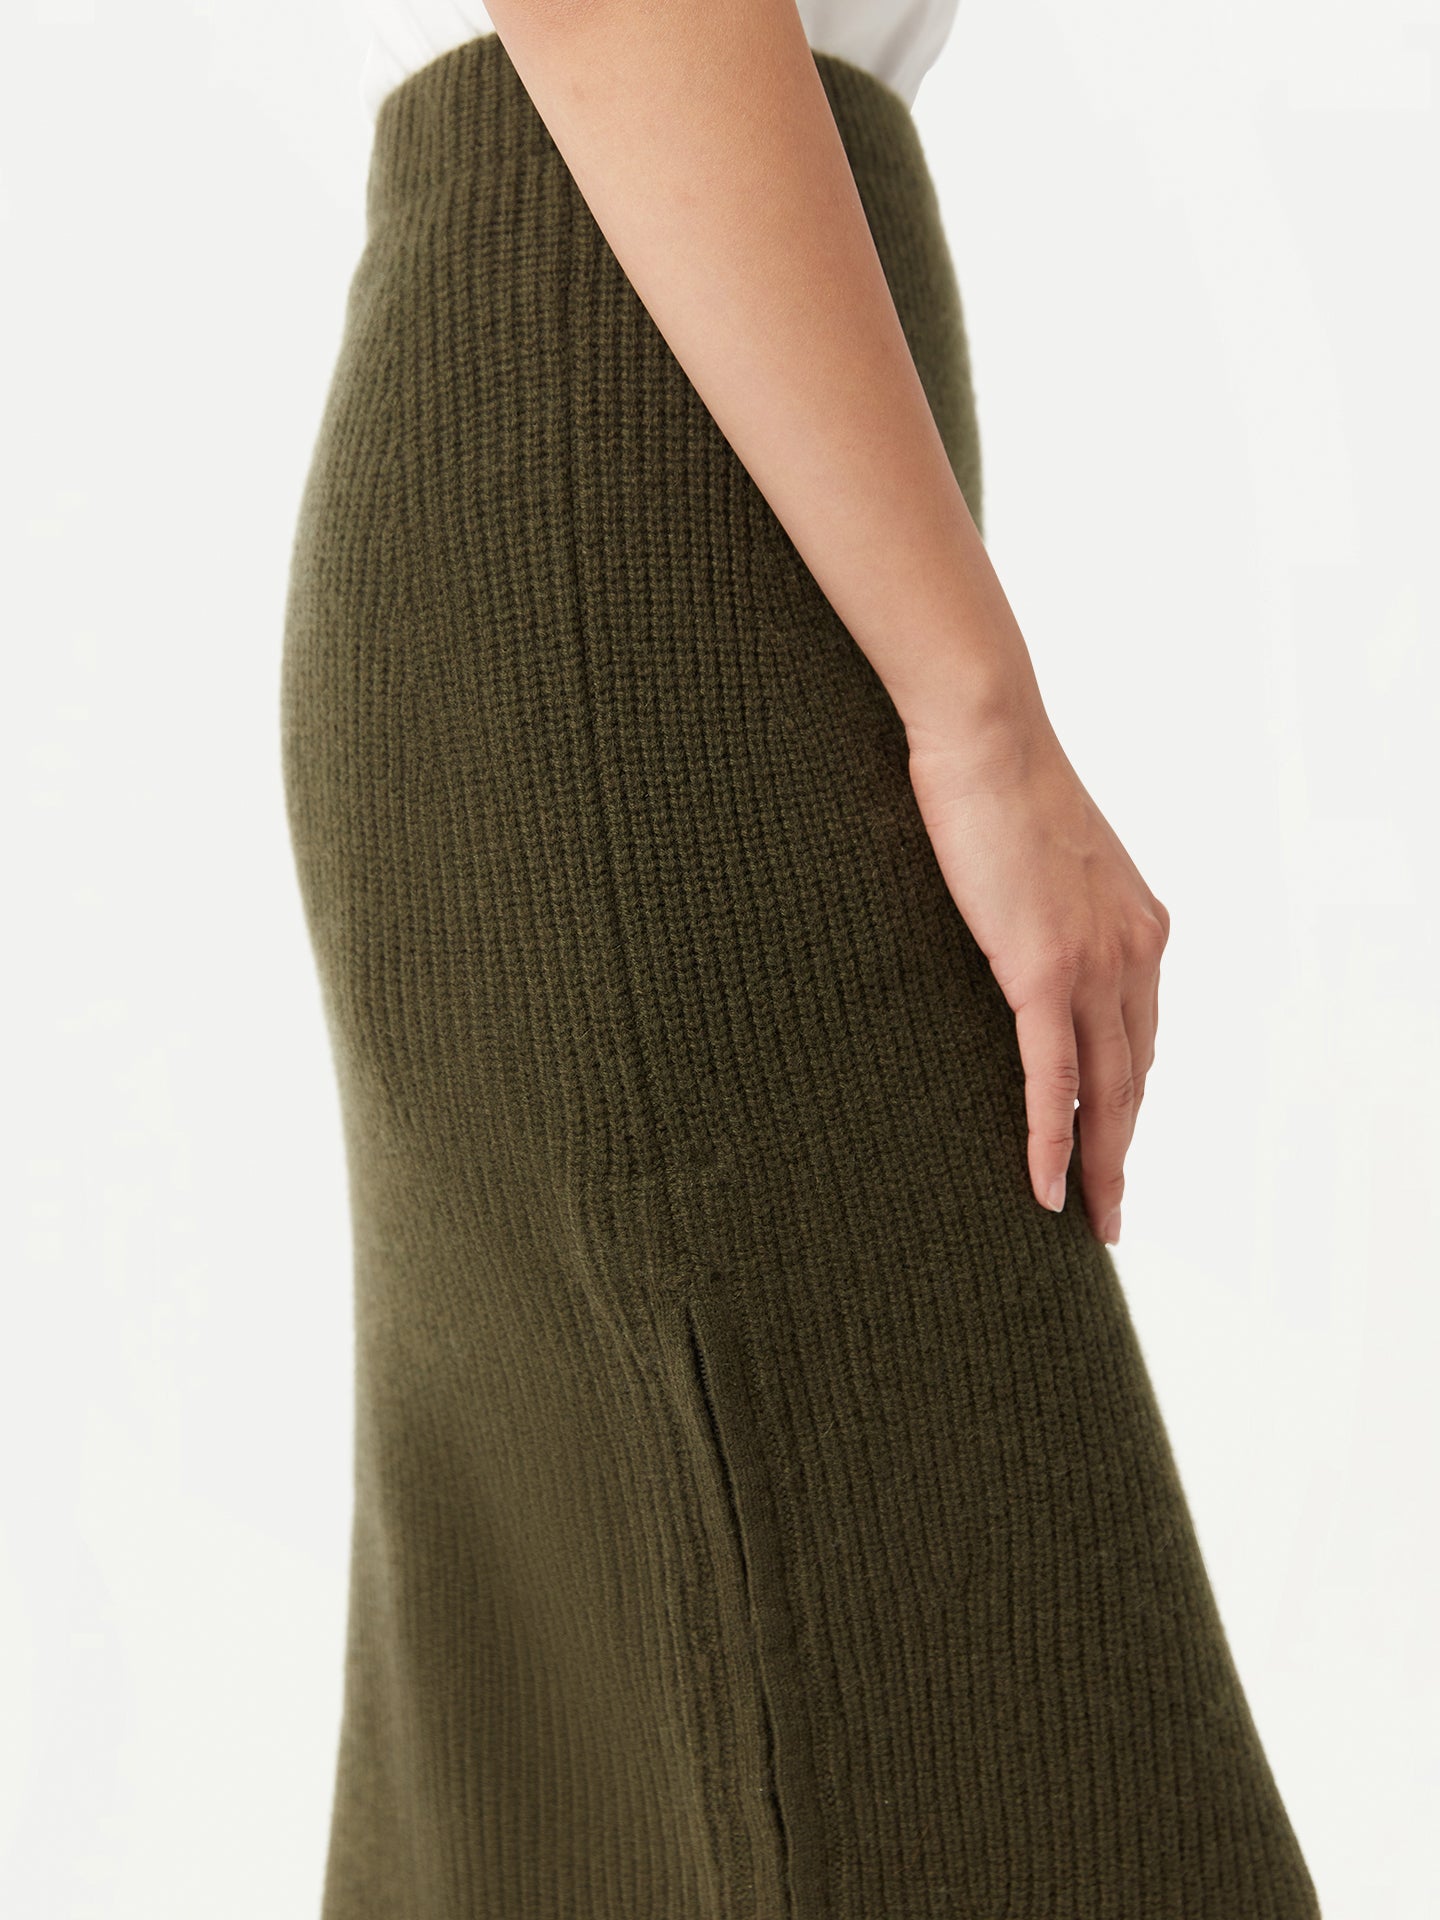 Cashmere Skirt with Zip